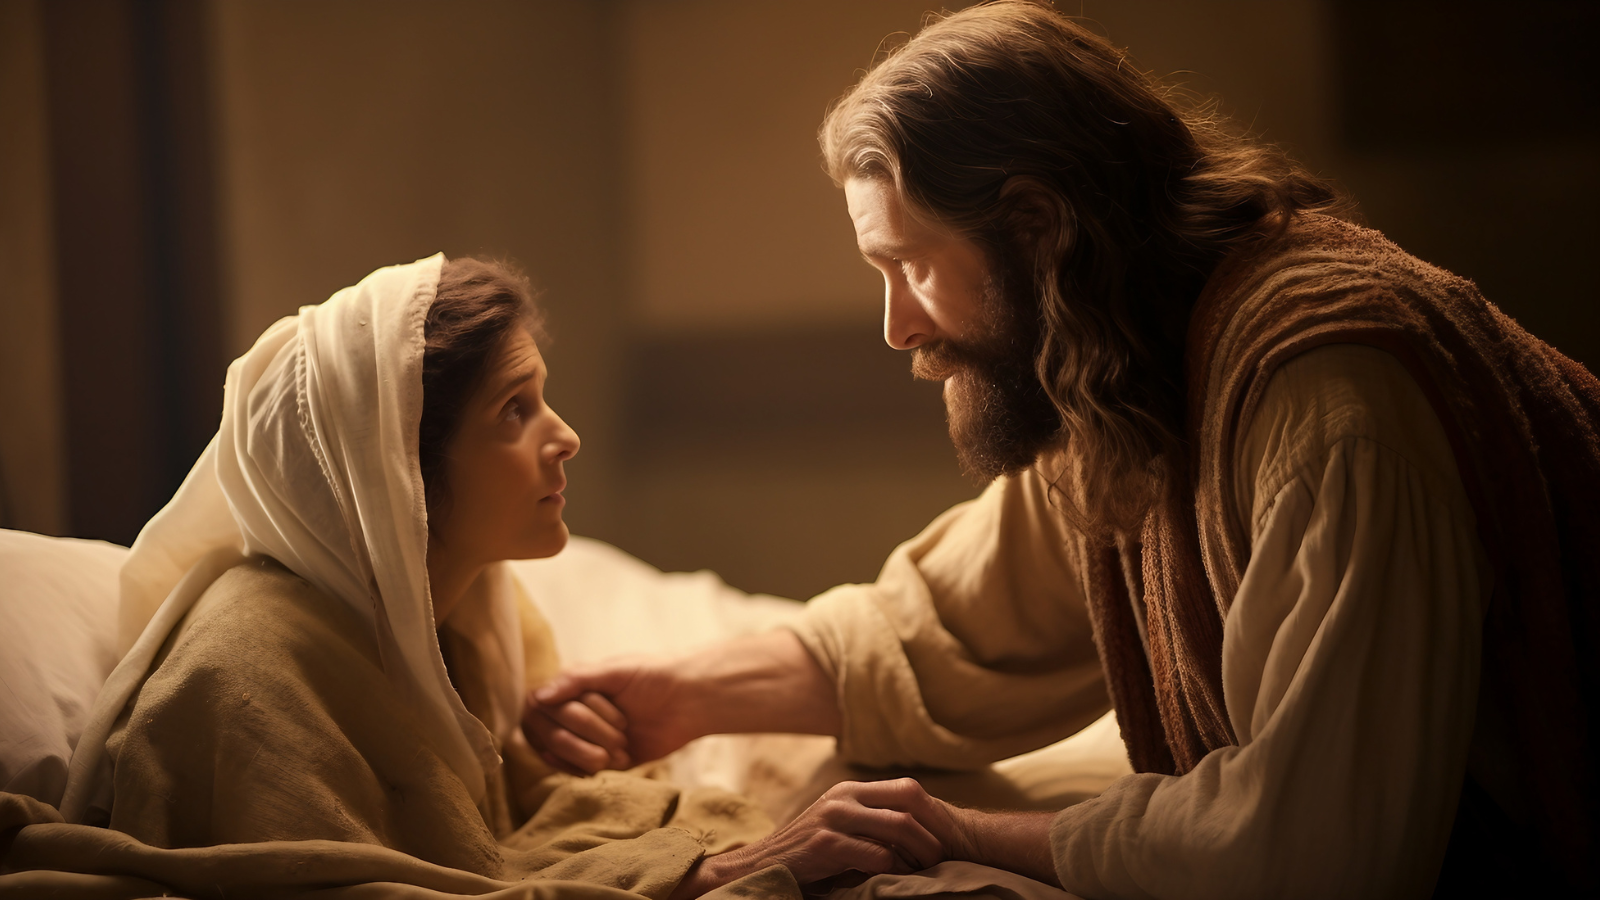 Jesus Speaking with a Woman